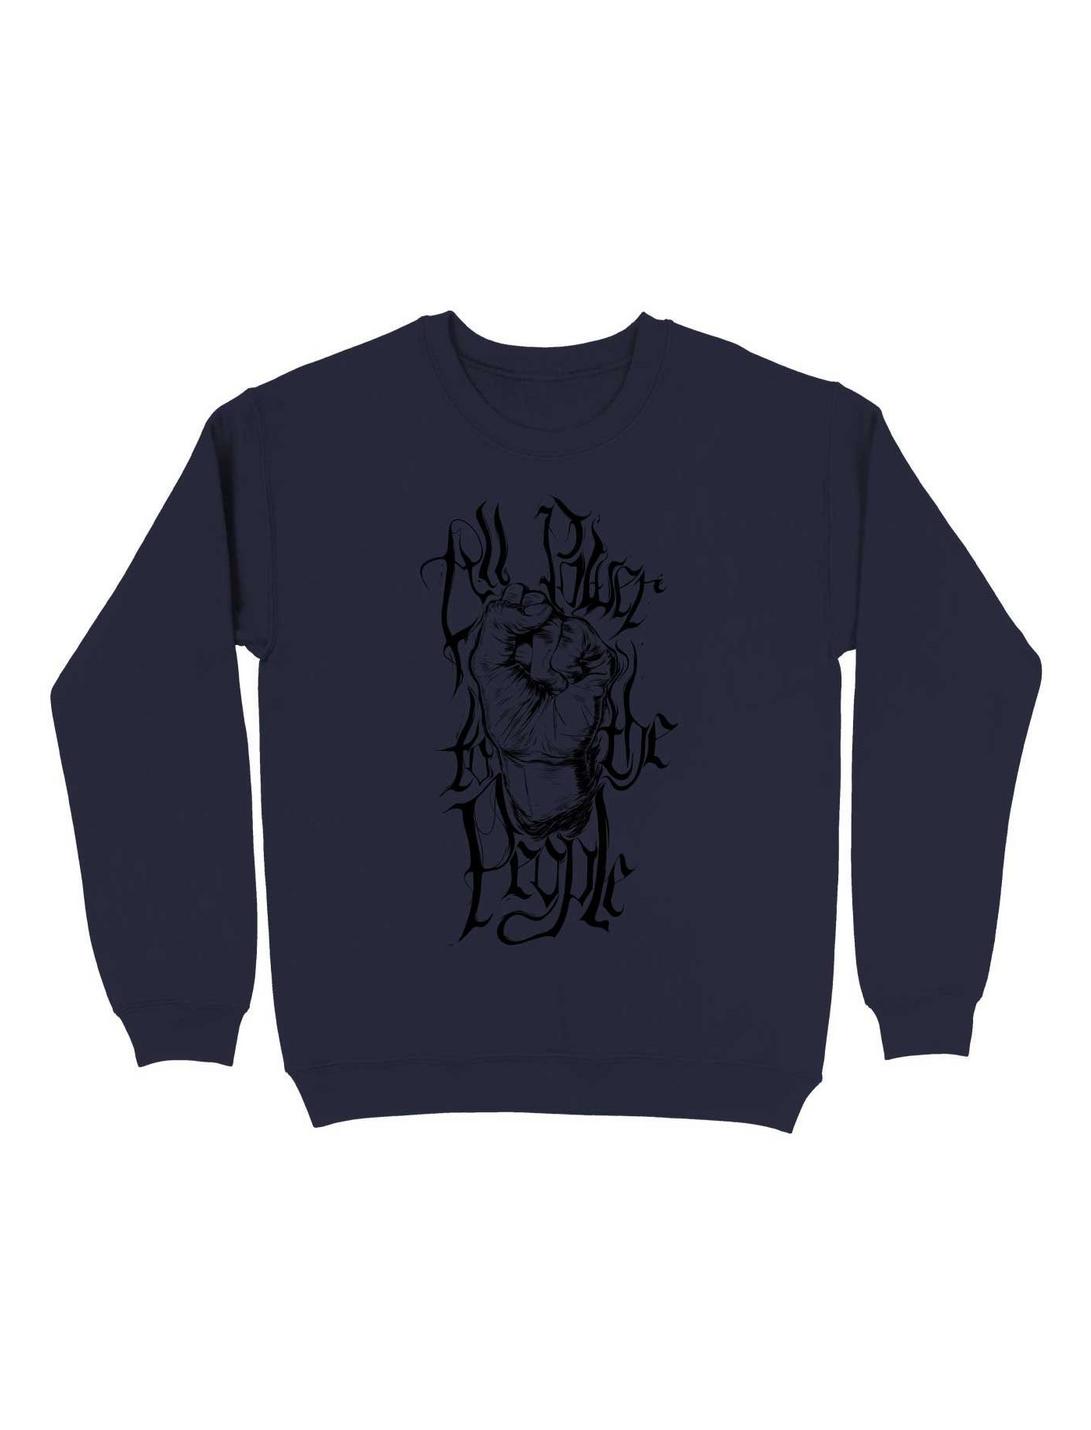 Black History Month Worst Creations All Power To The People Sweatshirt, NAVY, hi-res